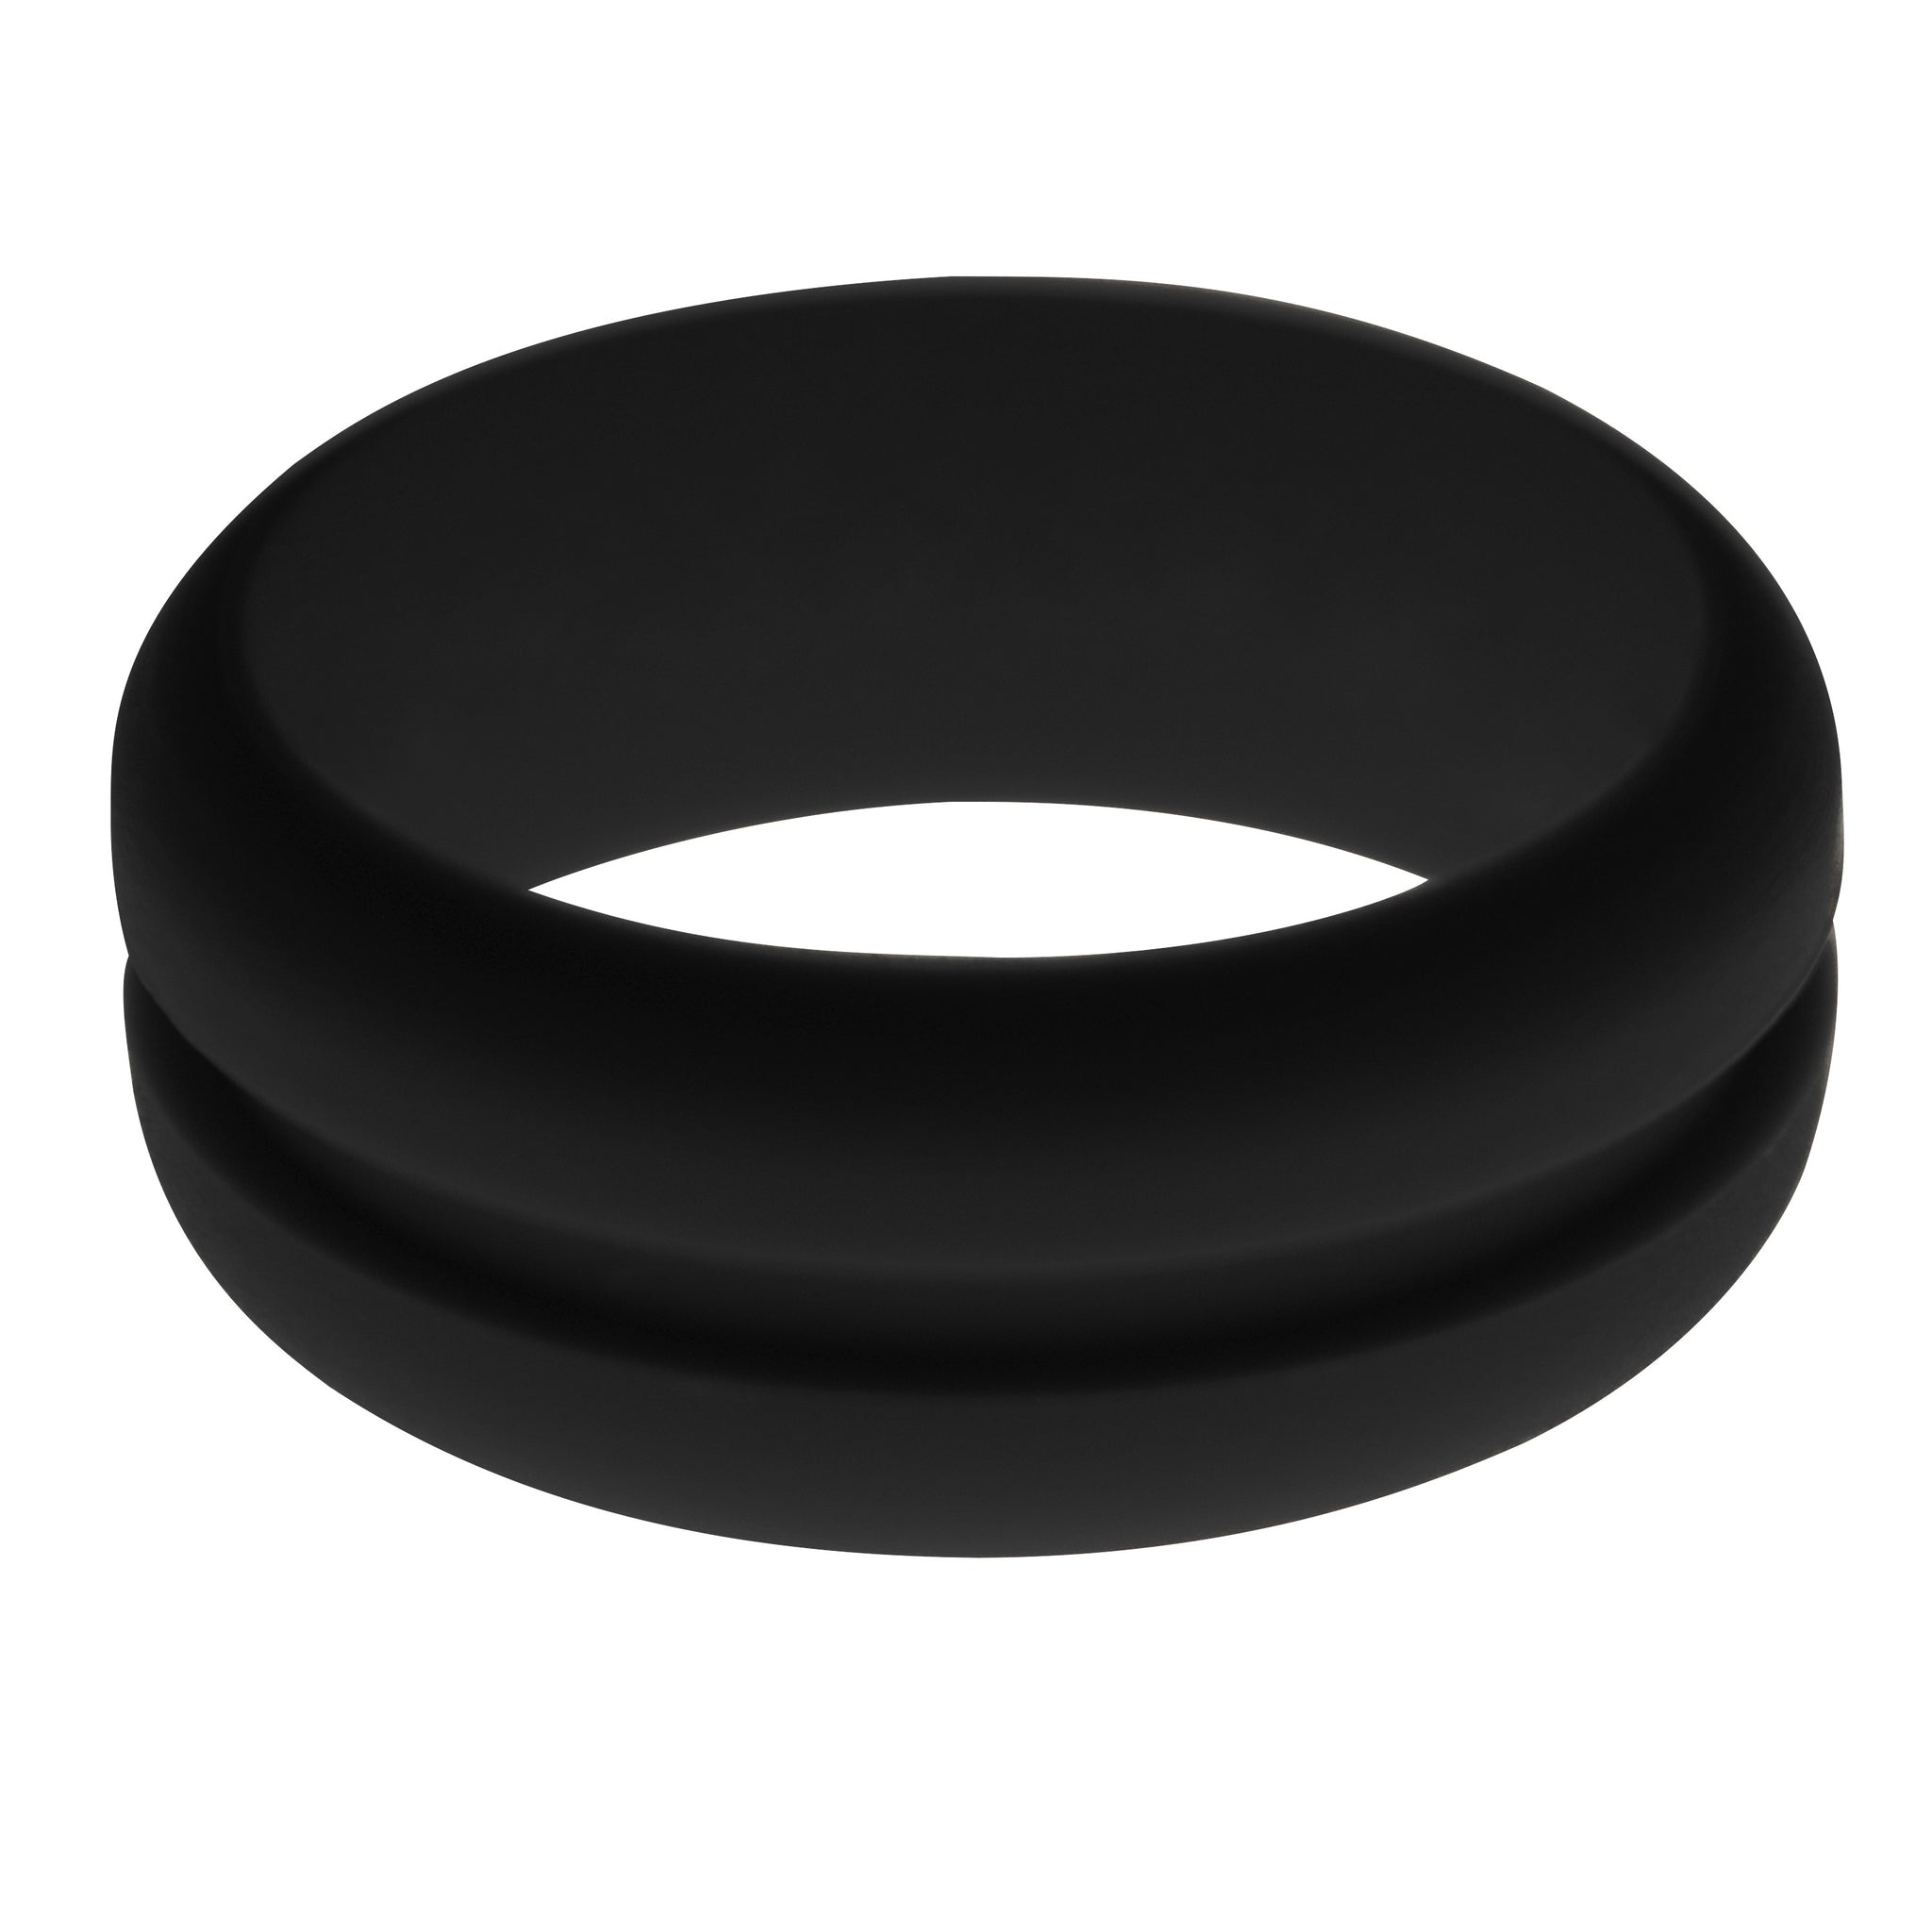 FLEX Ring - Silicone Rings and Safety Wedding Bands